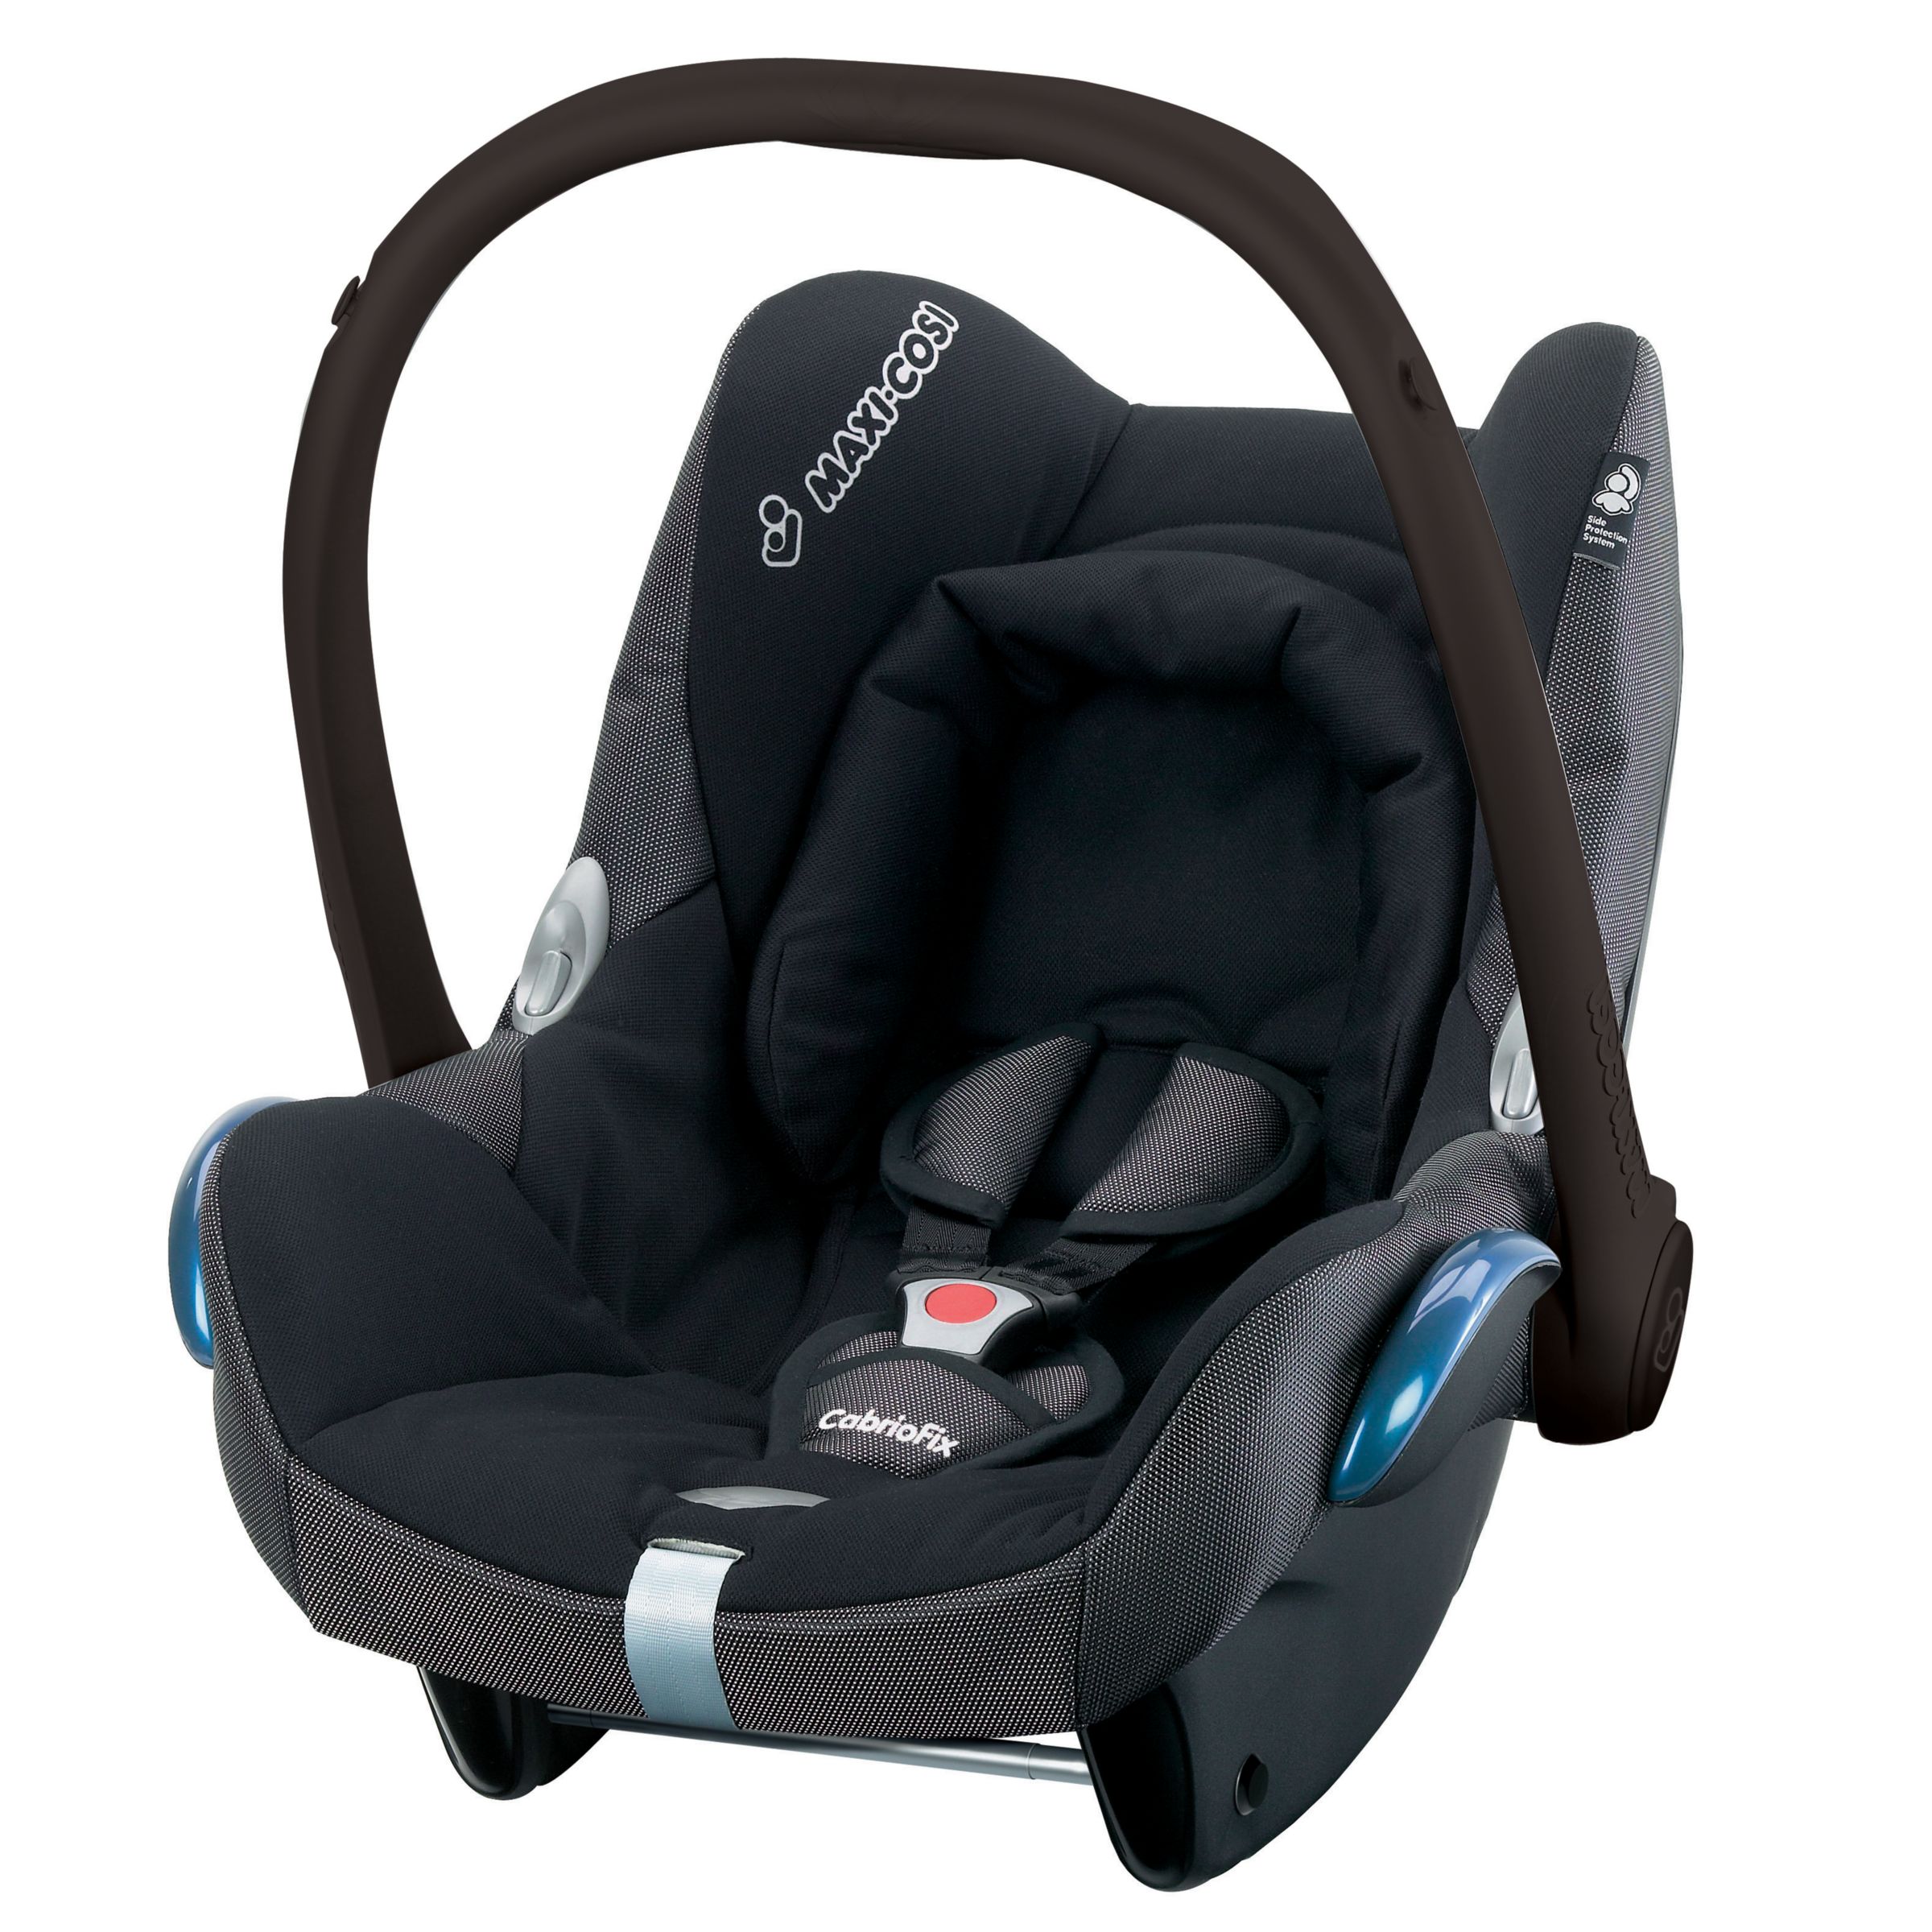 Maxi-Cosi CabrioFix Infant Carrier- Black Reflection